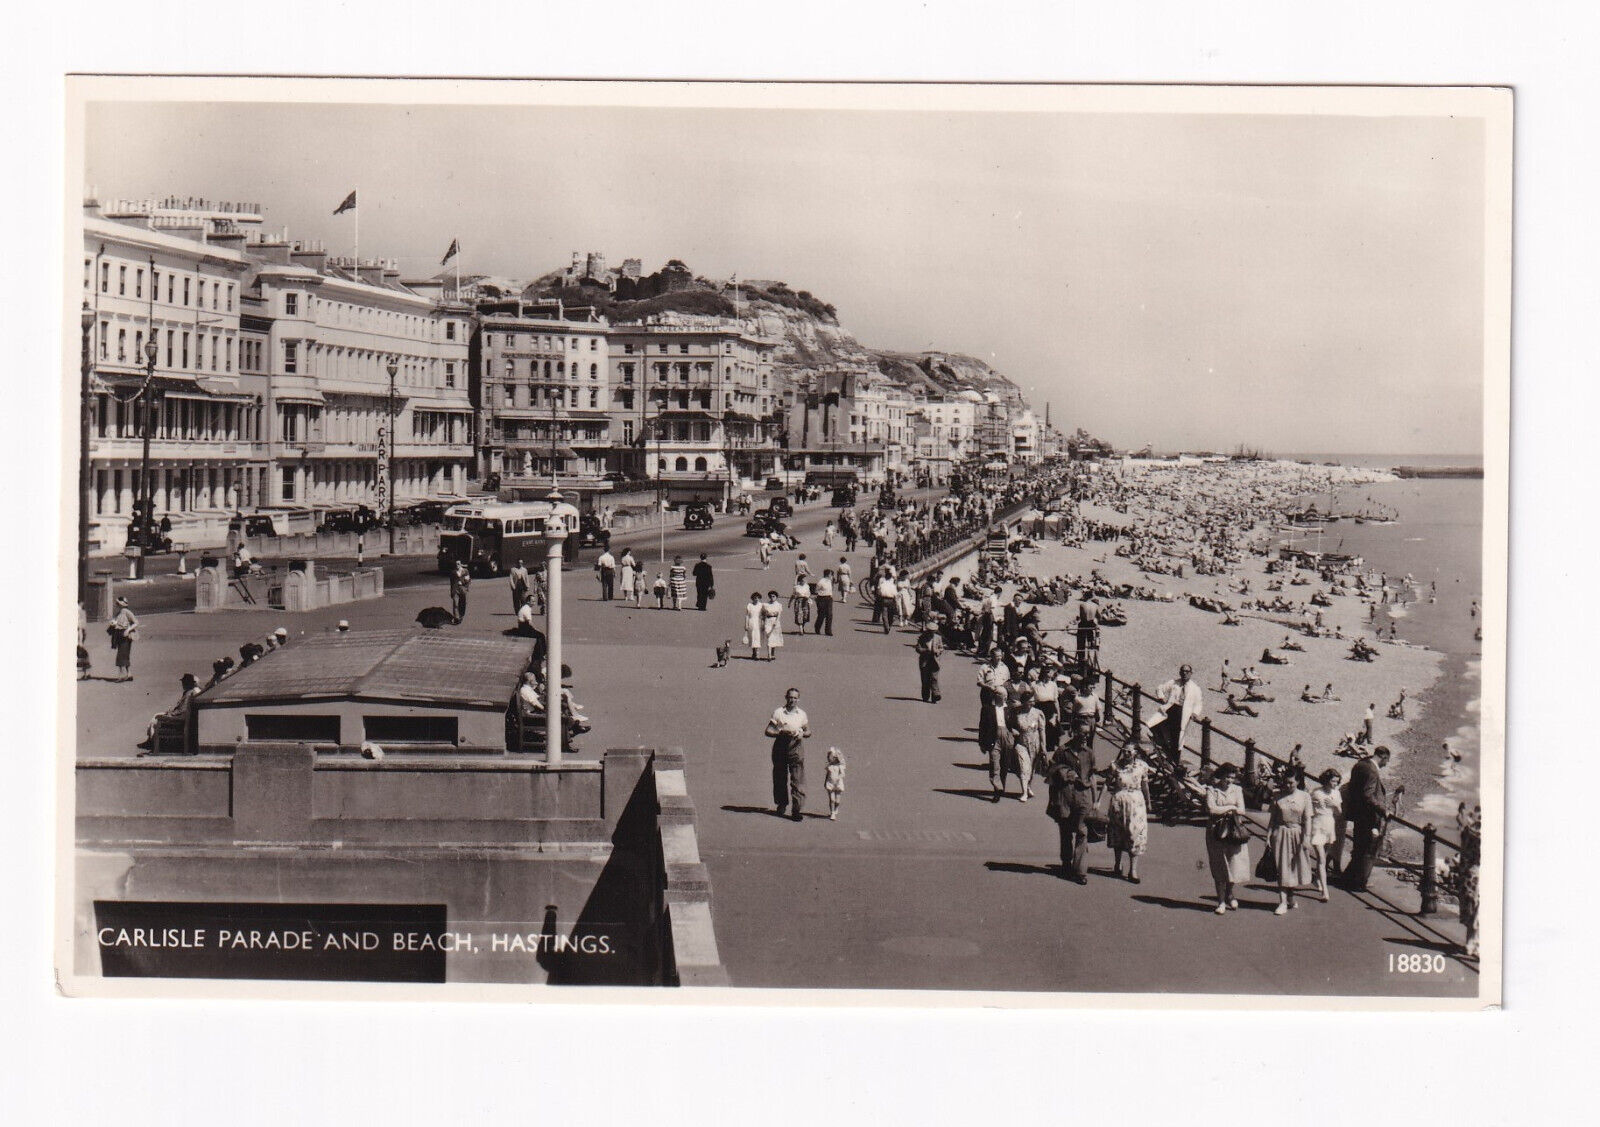 House Clearance - Real Photo Service Carlisle Parade And Beach, Hastings